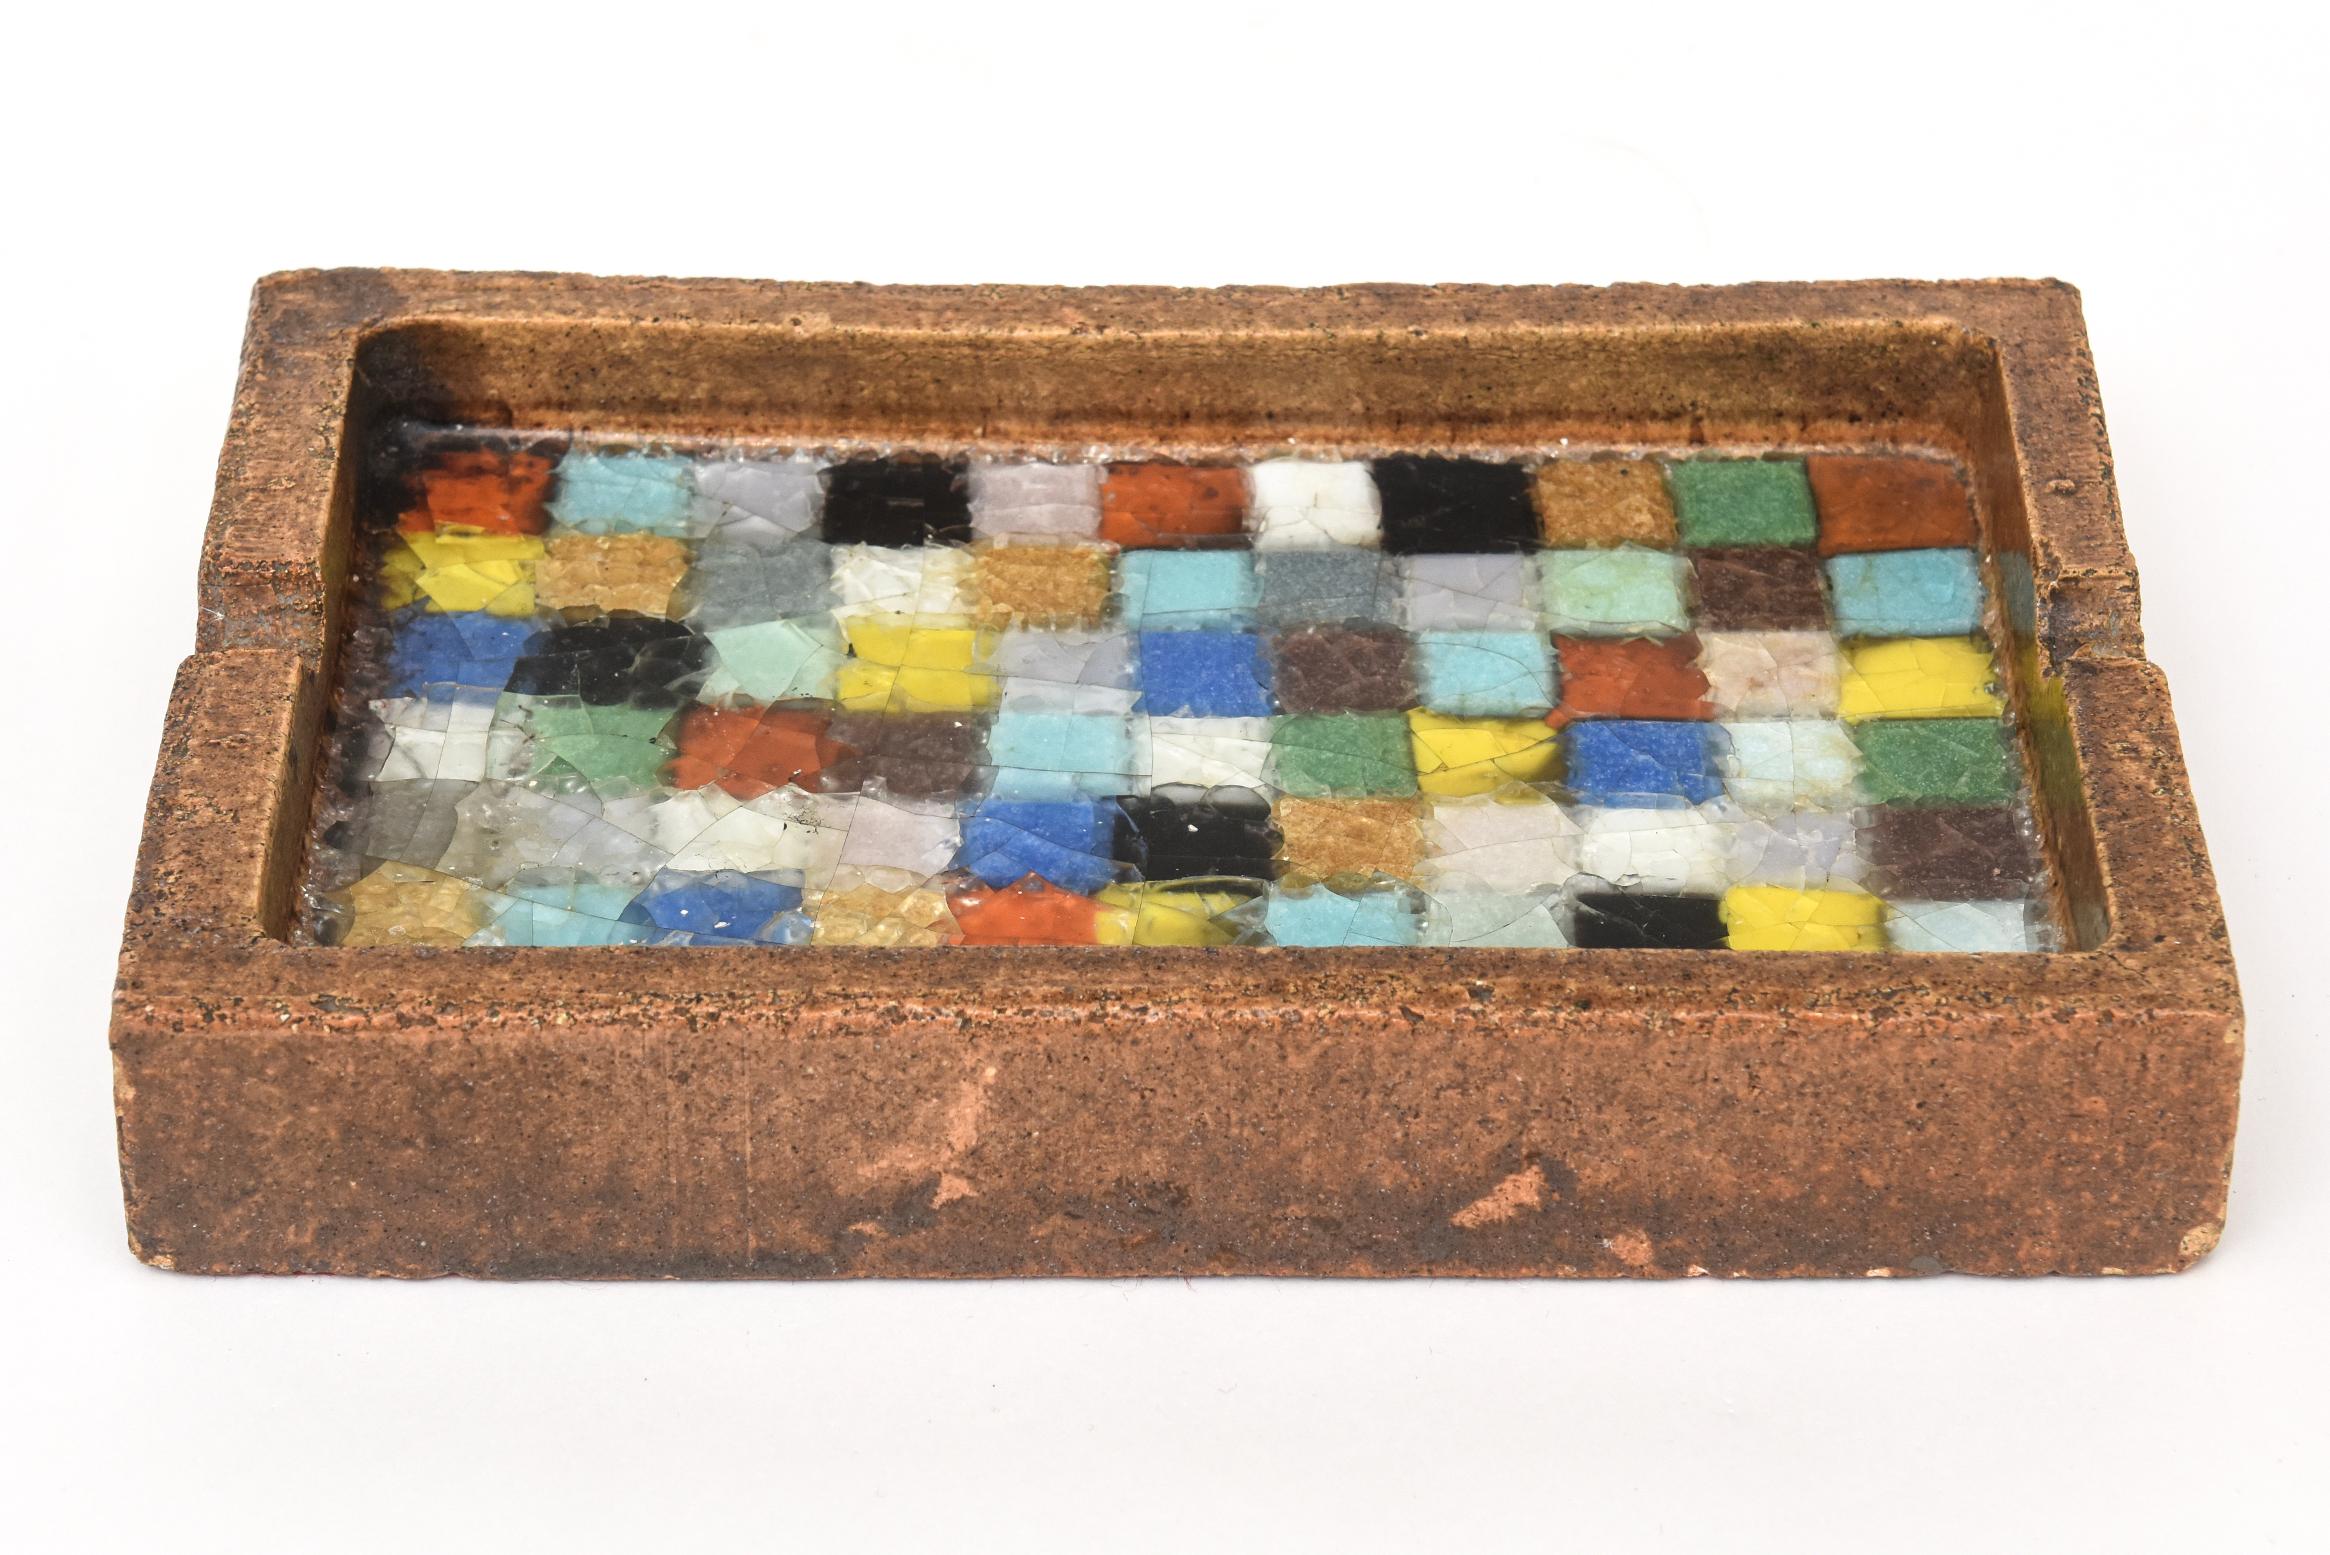 This large 1960s Italian Aldo Londi-attributed textured ceramic ashtray by Bitossi dazzles in the sheer number of fused glass colors achieved in its 